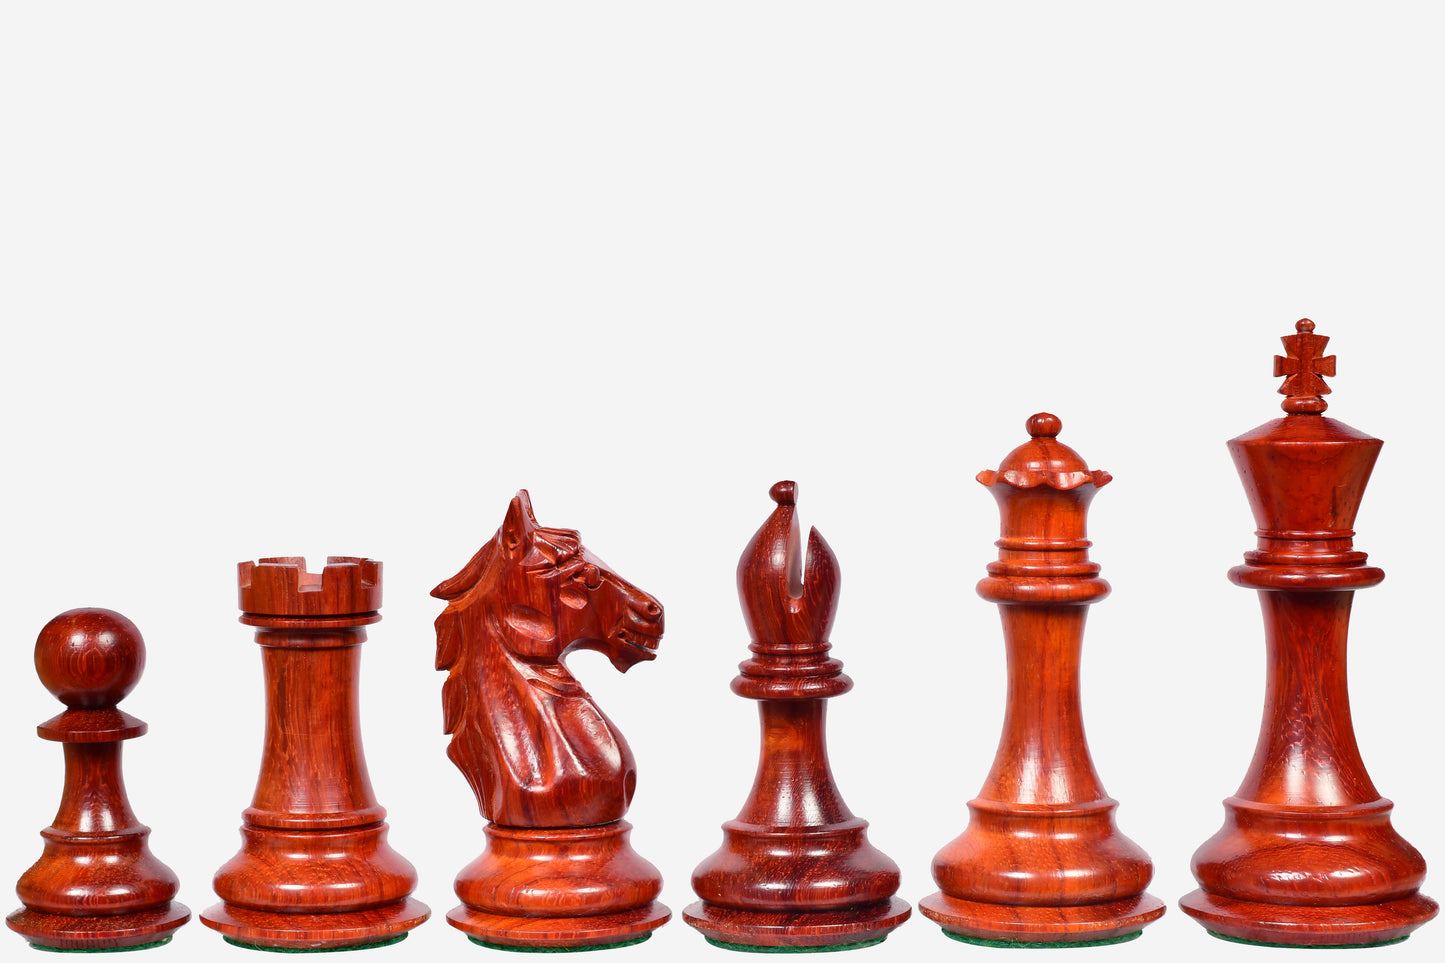 Alban Series Wooden Chess Pieces in Bud Rose Wood & Box Wood - 4.0" King